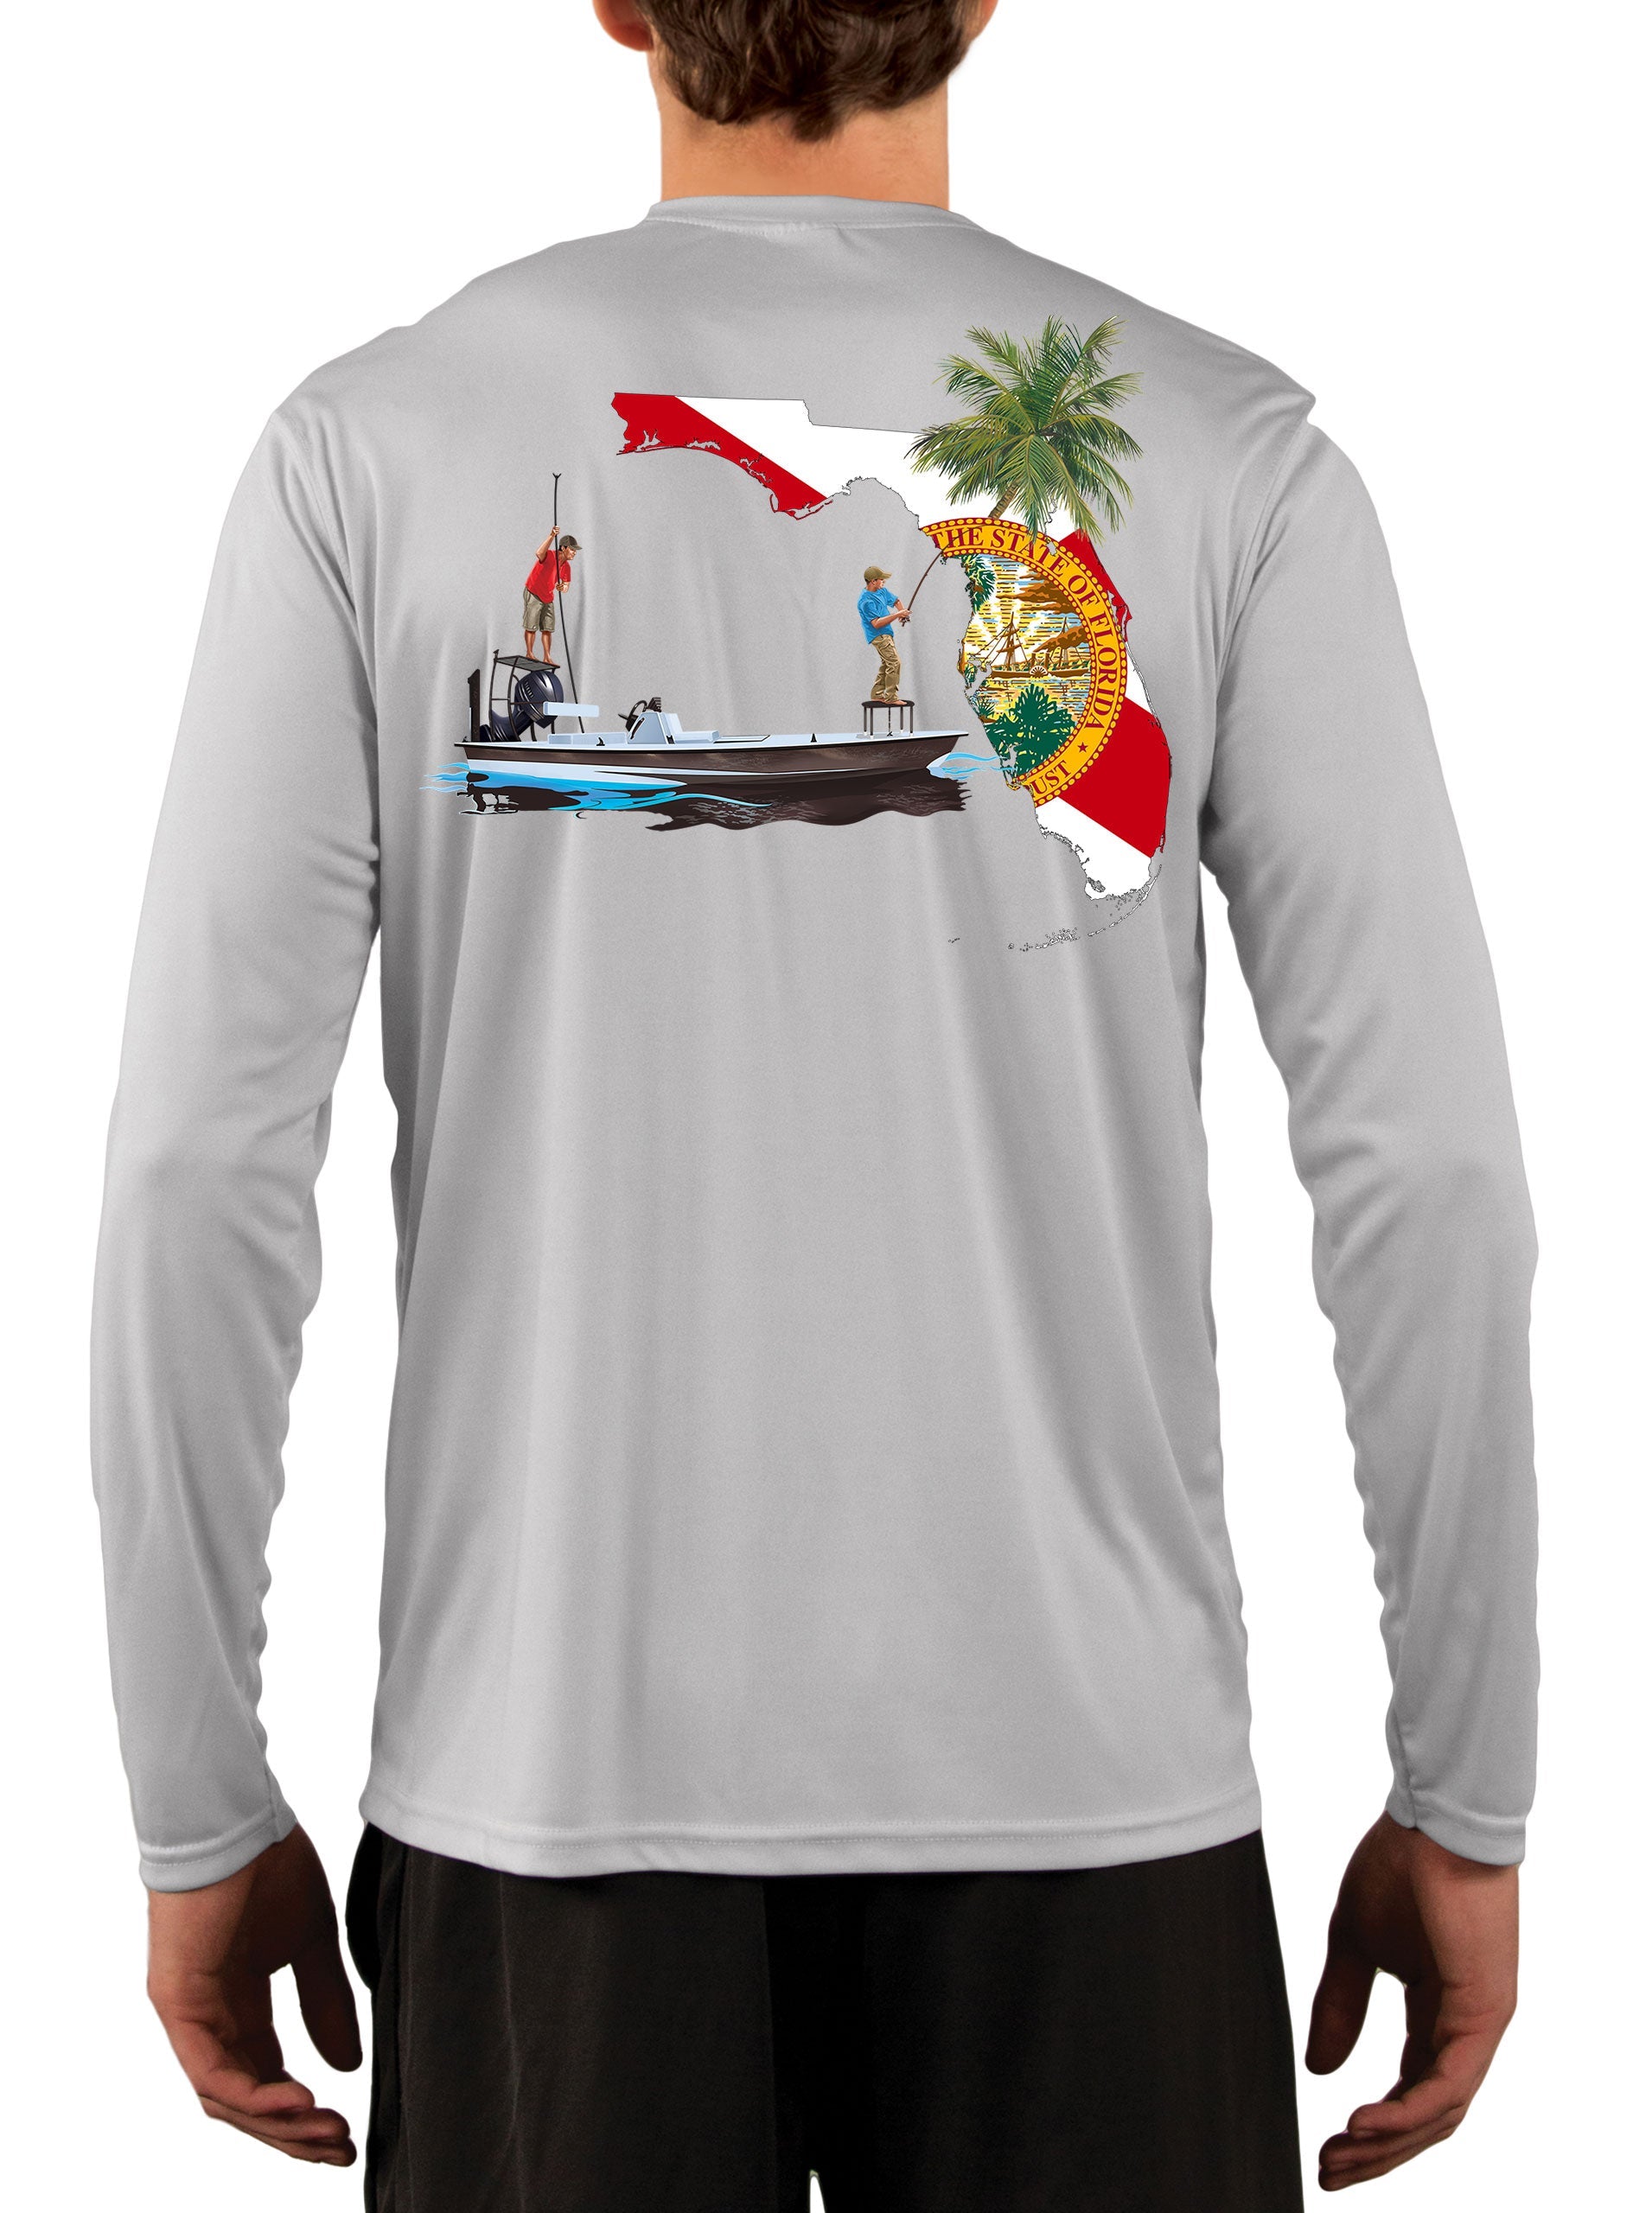 [New Artwork] Poling Skiff Florida State Flag Fishing Shirts for Men with Florida Flag Sleeve Yellow / Large